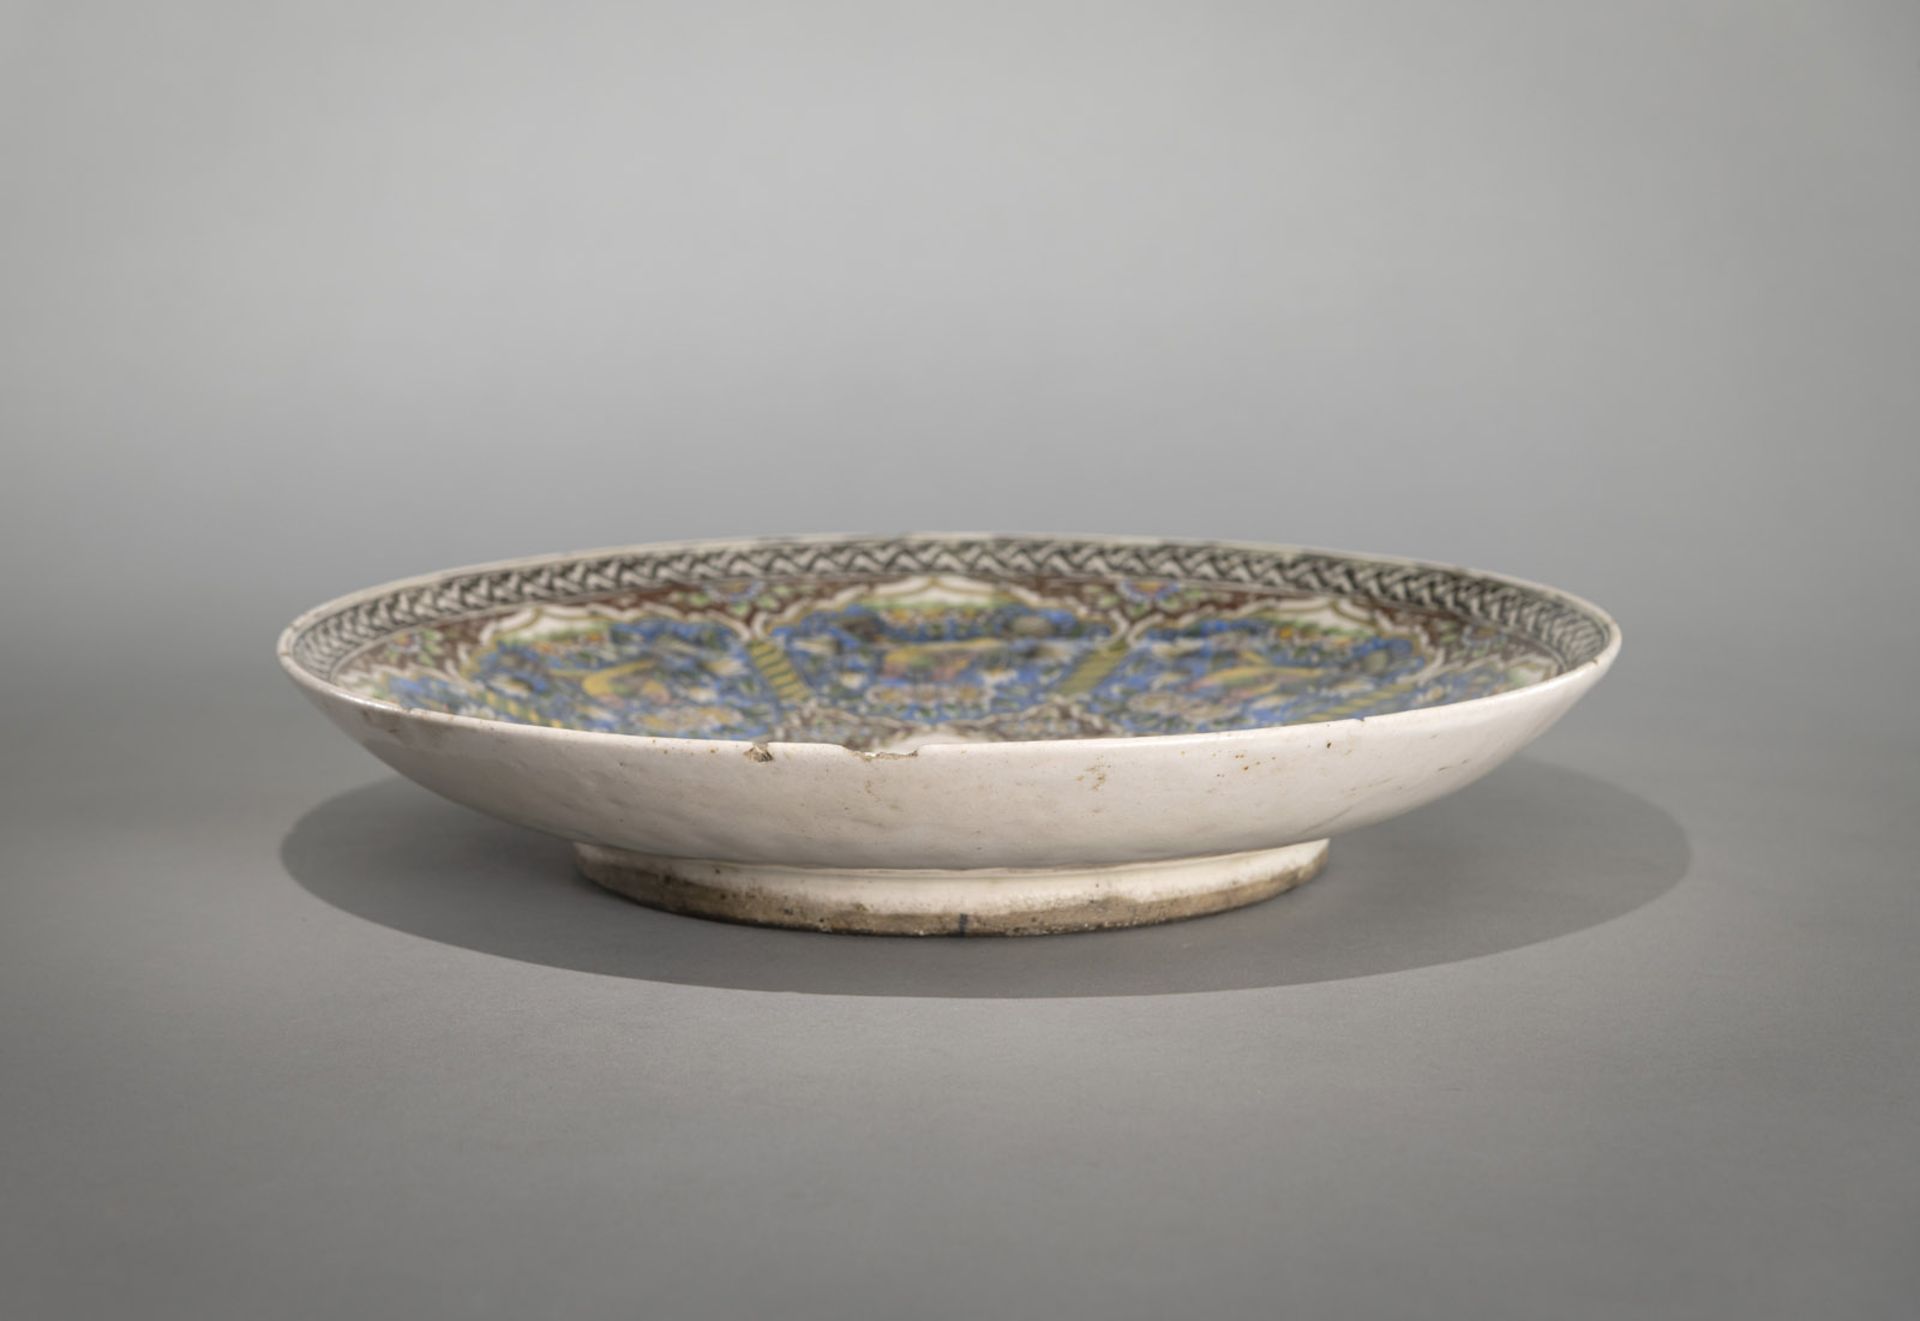 A QAJAR GLAZED POTTERY DISH WITH FINE DECORATION OF FIGURES, ANIMALS AND FLOWERS - Image 3 of 4